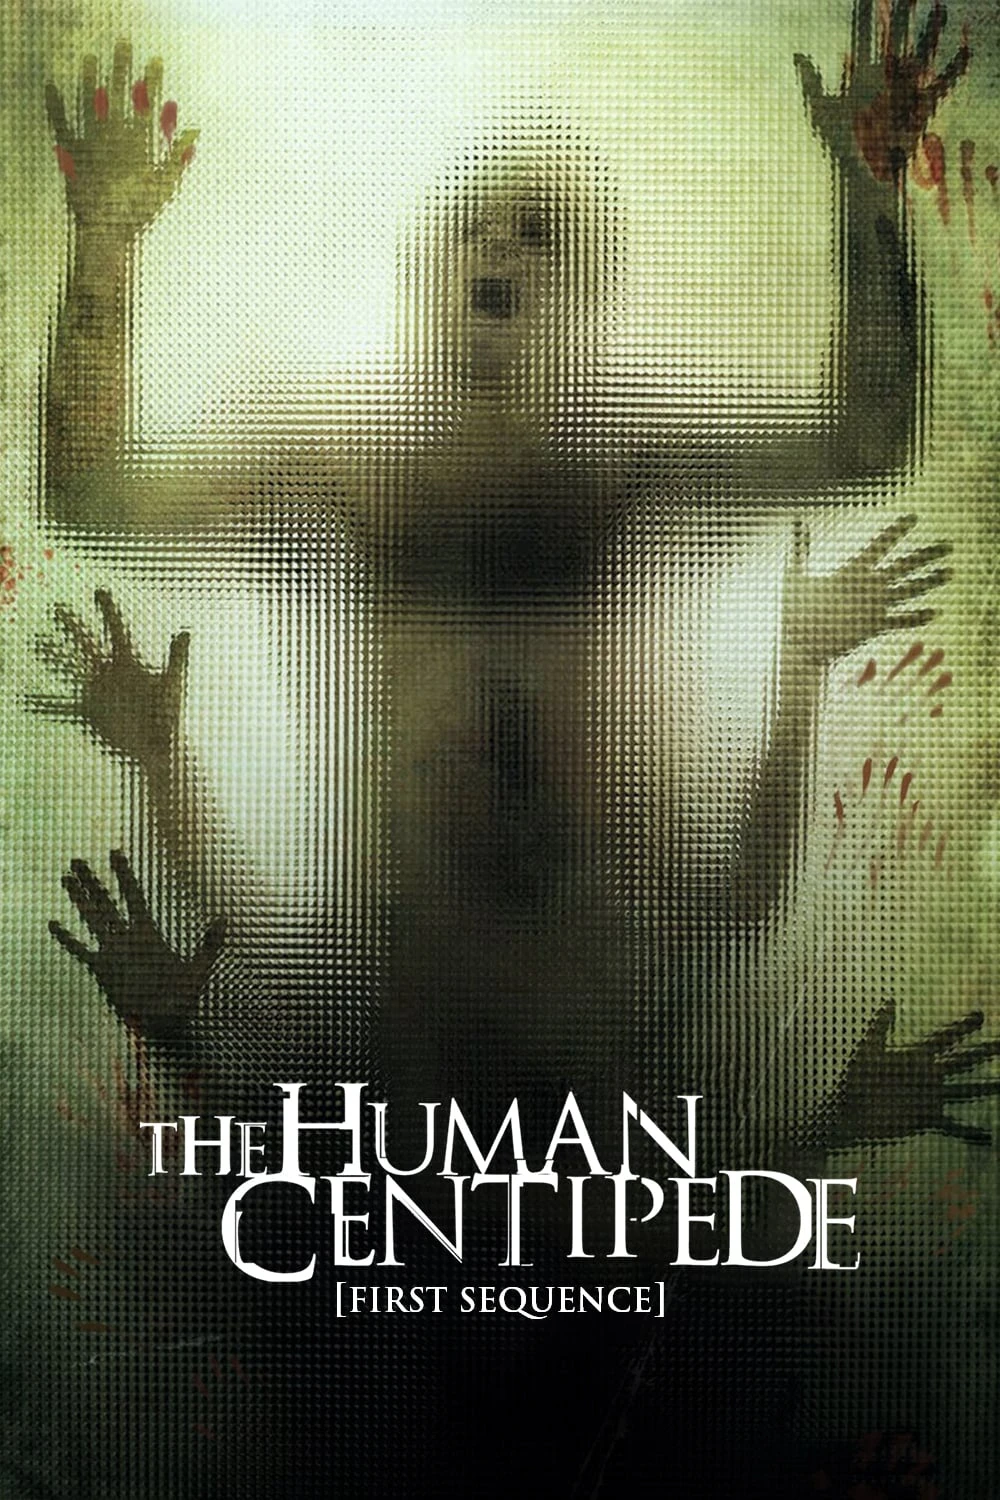 Con Rết Người | The Human Centipede (First Sequence) (2009)